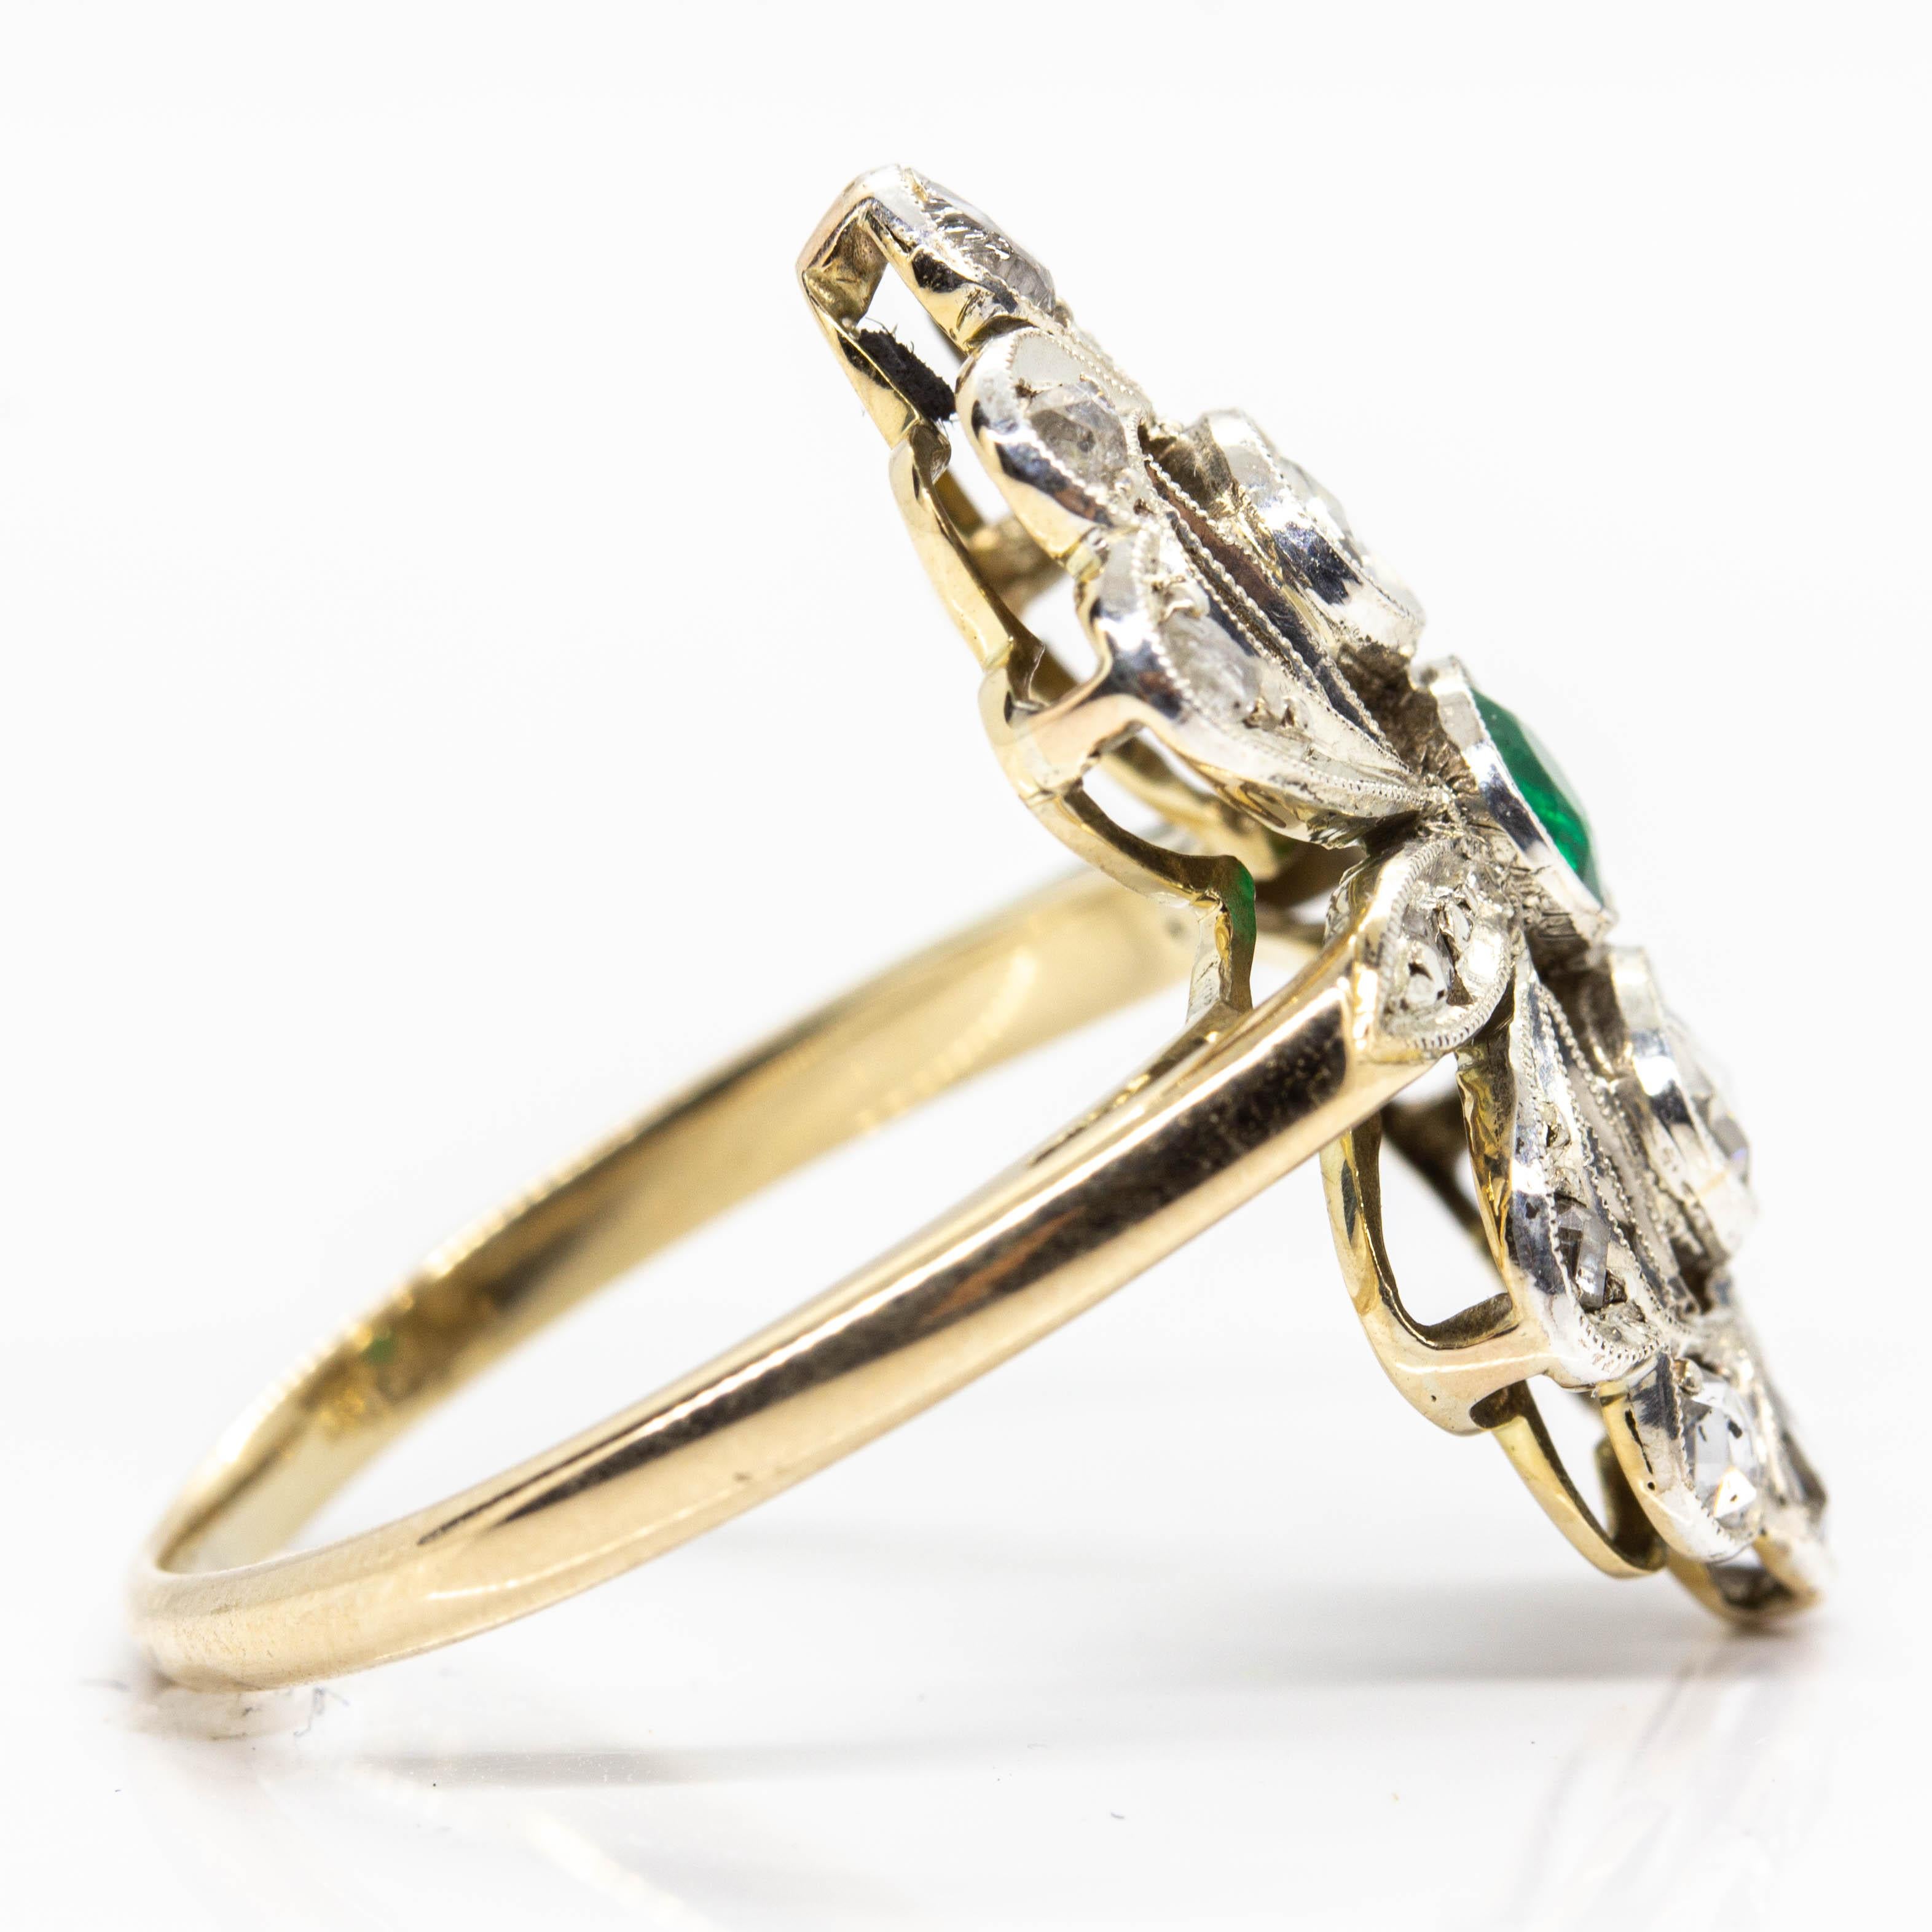 Period: Victorian (1836 – 1900)
Composition: 18k Gold and Silver
•	1 natural emerald 0.40ctw.
•	14 rose cut diamonds J-SI1 0.90ctw.
Ring size: 7 ½ 
Ring face measure: 20mm x 17mm 
Rise above finger: 5mm
Total weight: 4.2 grams – 2.7dwt
